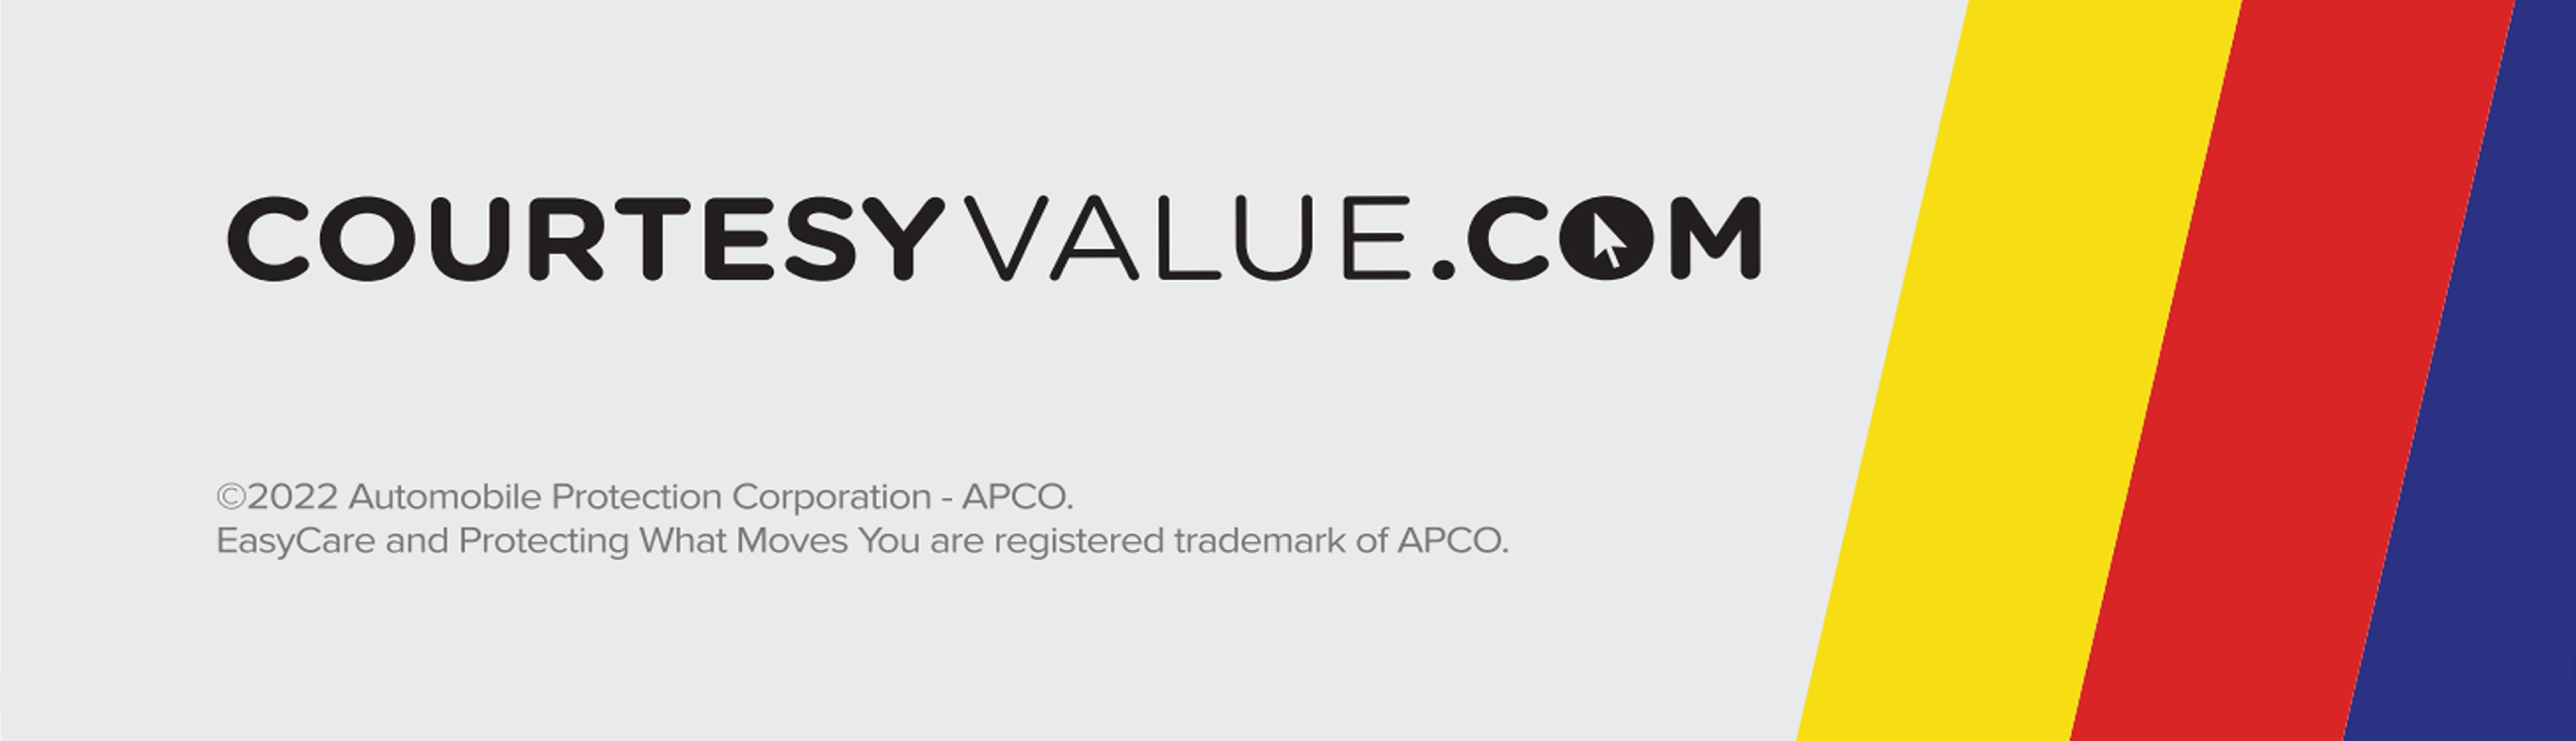 COURTESYVALUE.COM 2022 Automobile Protection Corporation - APCO. EasyCare and Protecting What Moves You are registered trademark of APCO.